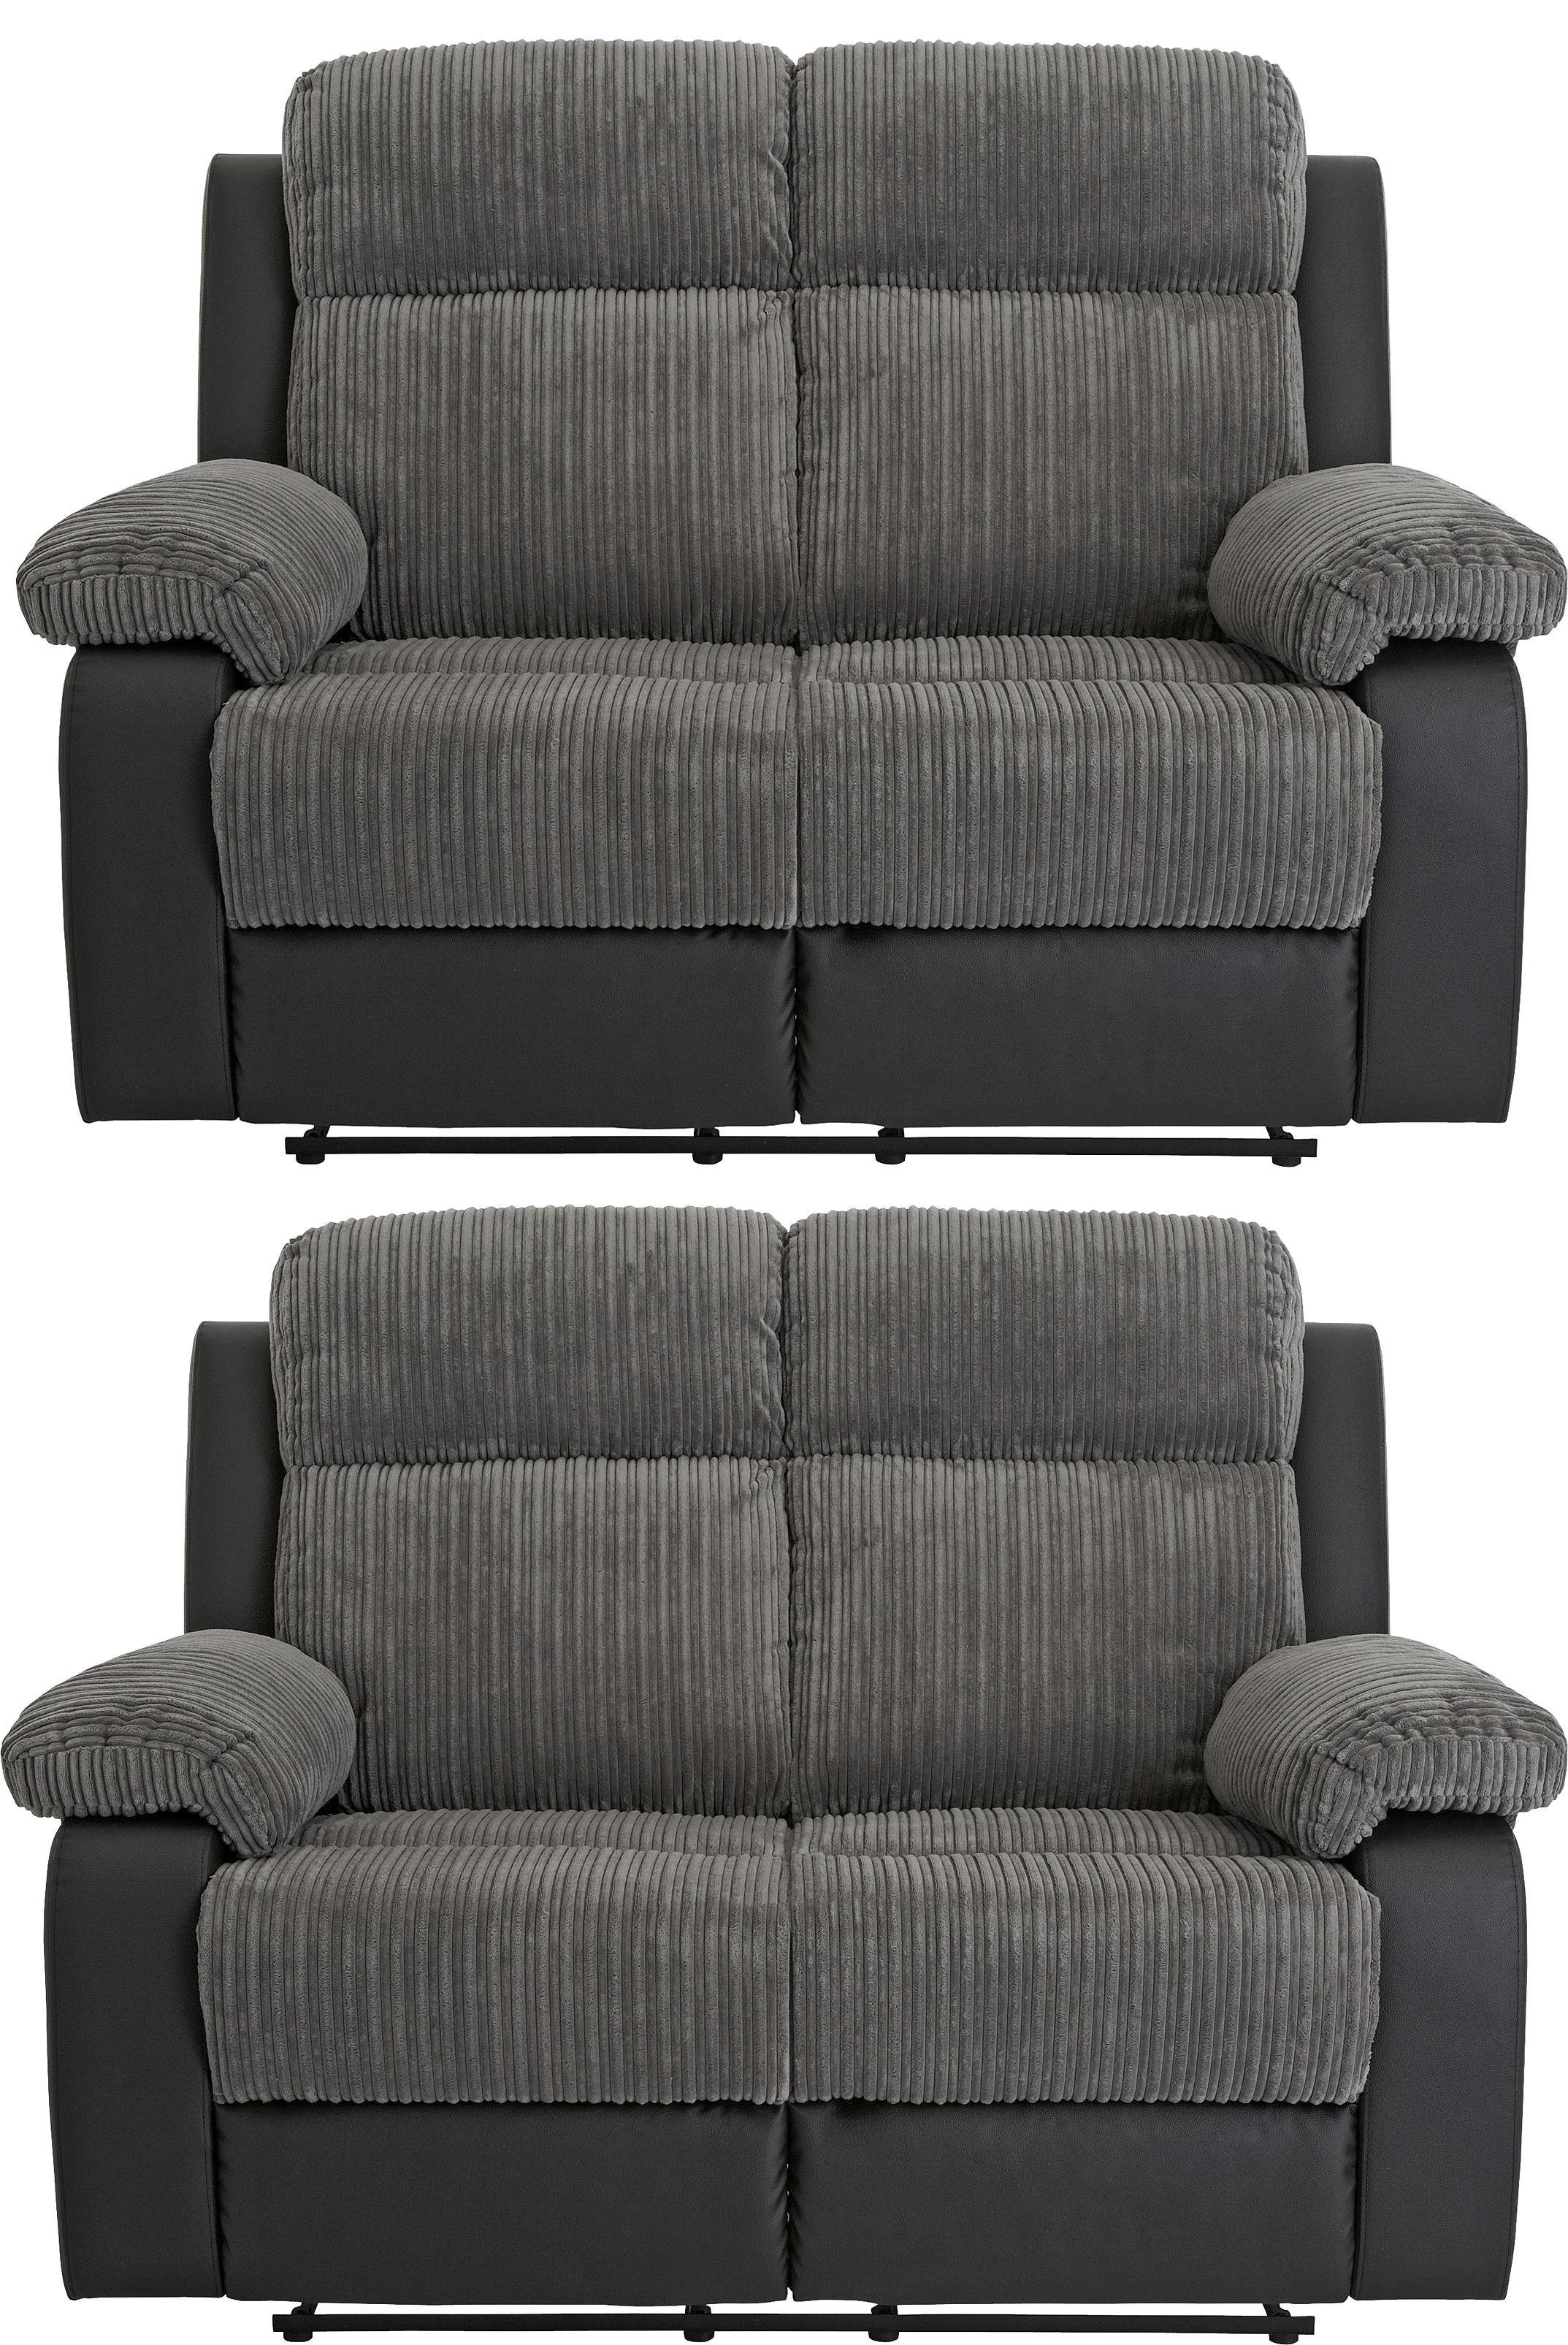 Argos Home Bradley Pair of 2 Seater Recliner Sofa - Charcoal (2376622